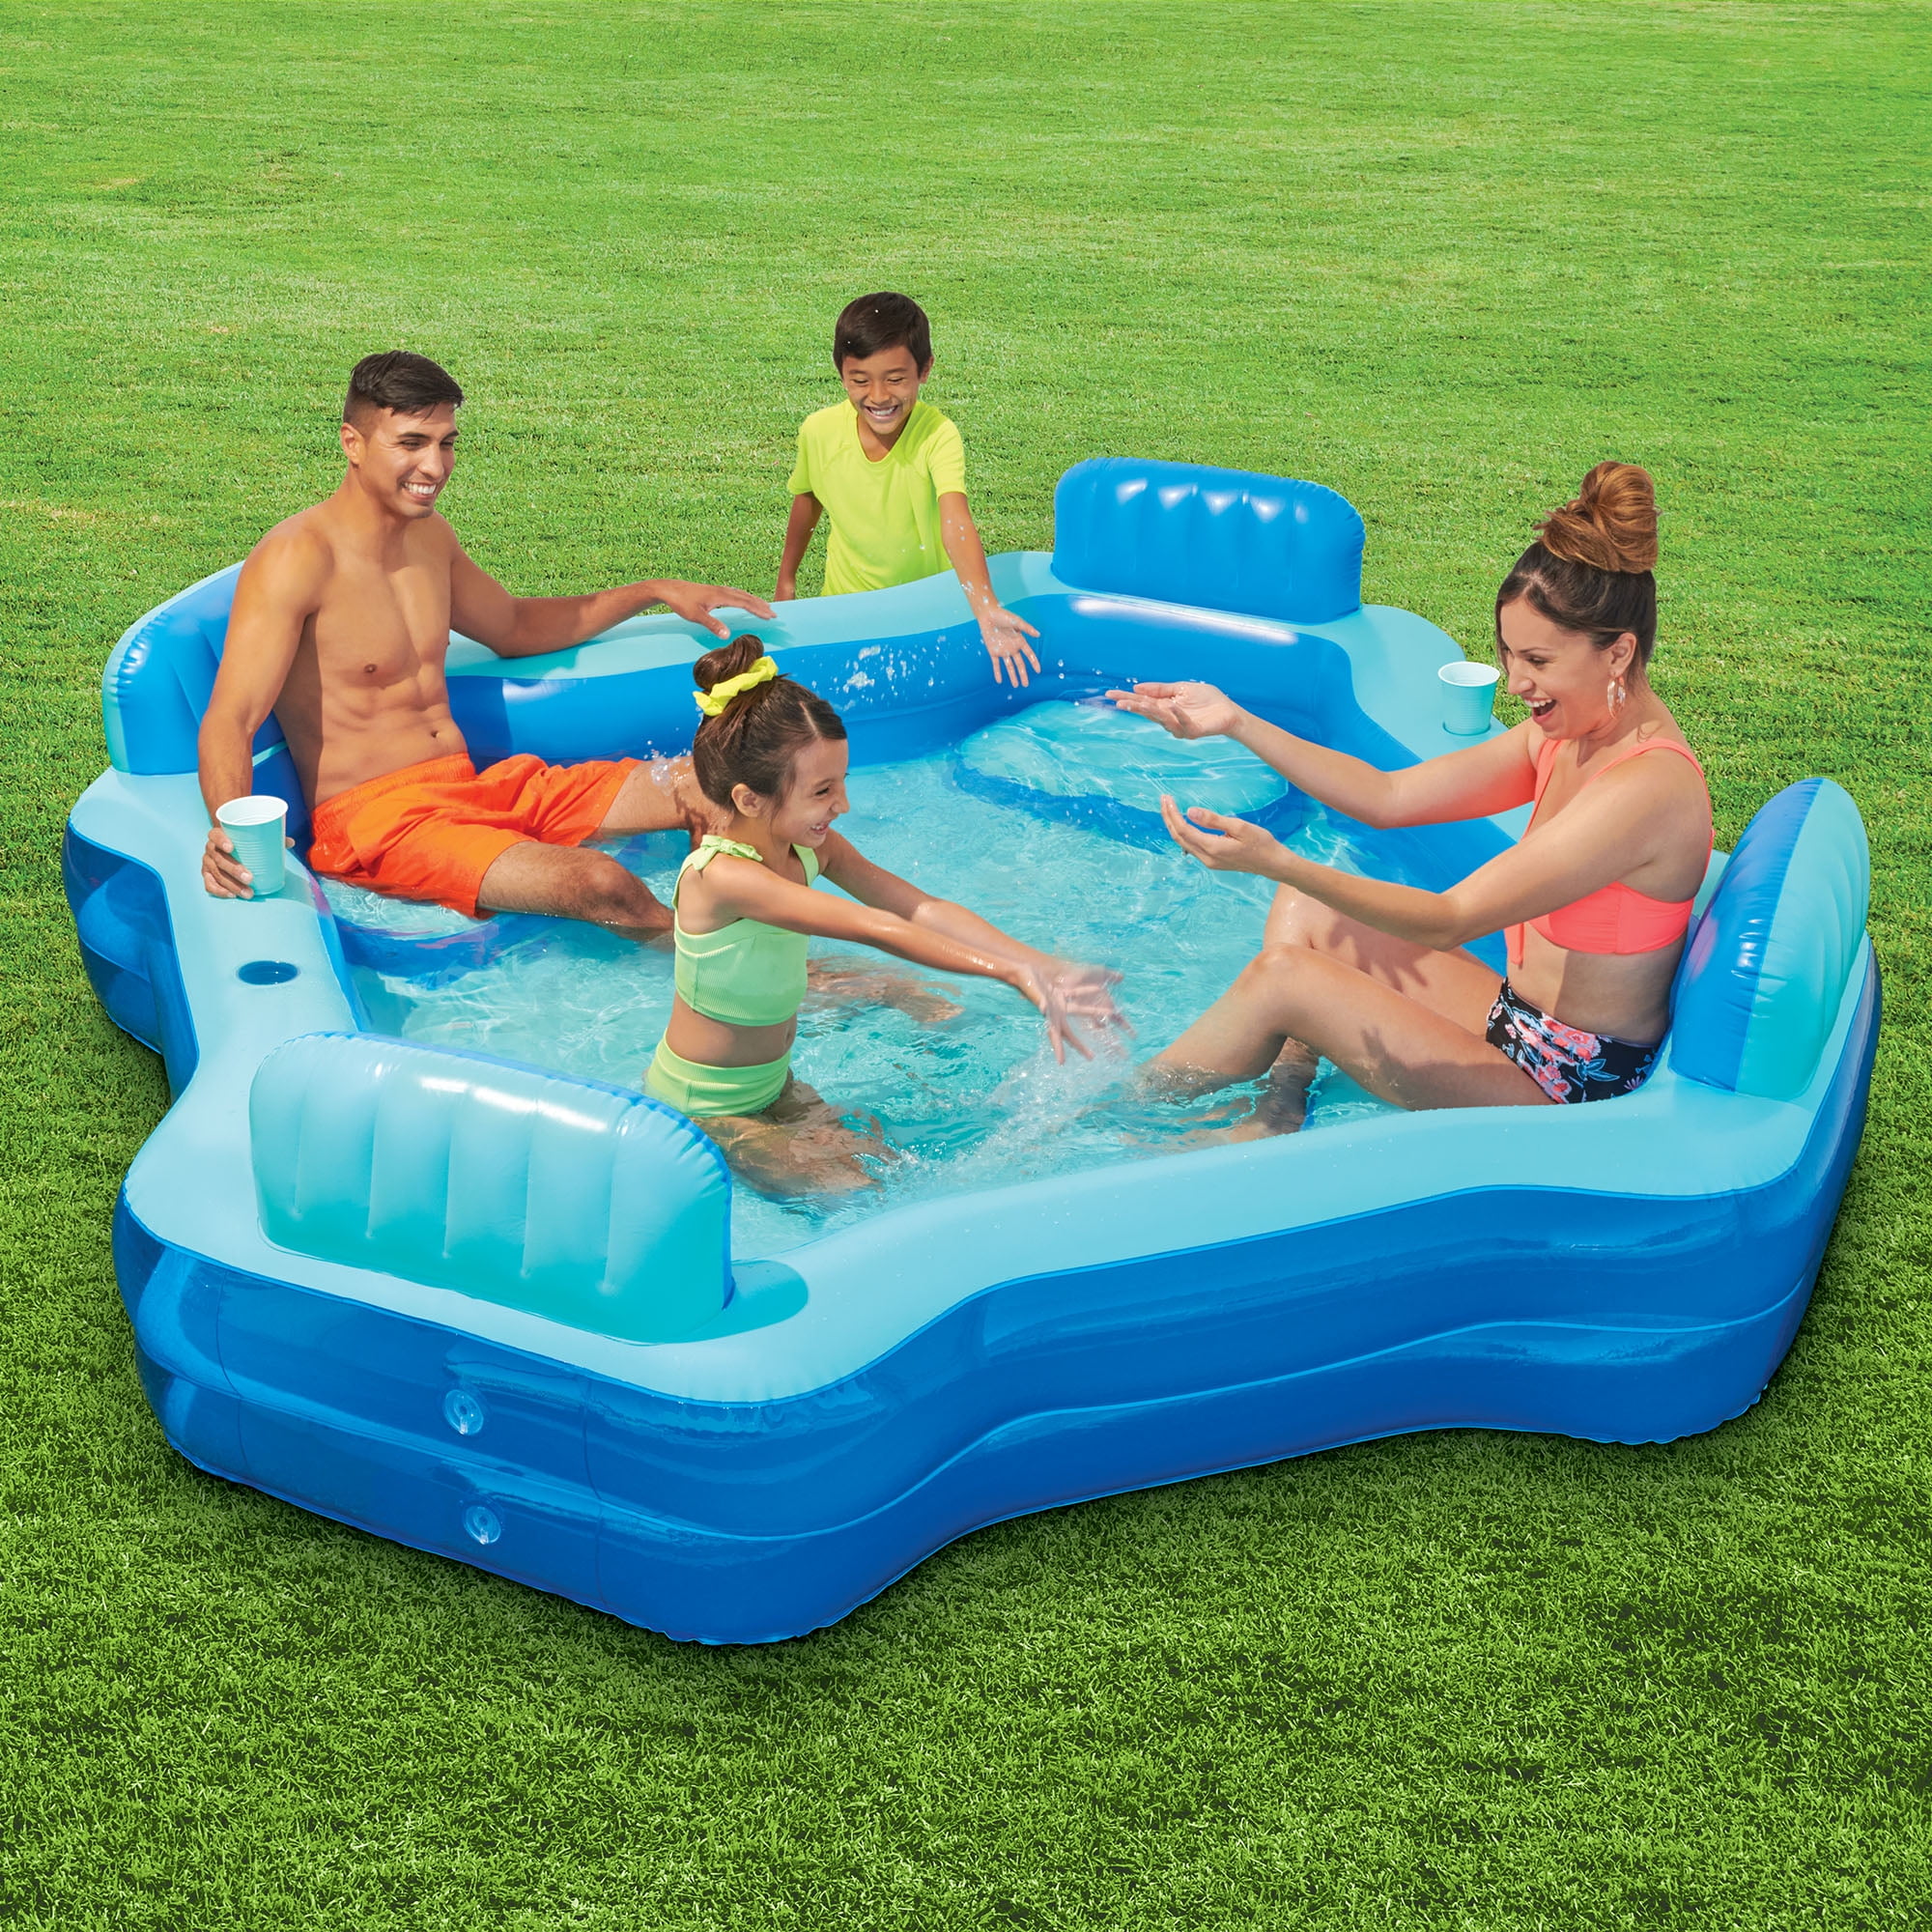 Play Day Rectangular Inflatable Family Kids Swimming Pool 10-Ft Fun Outdoors New 